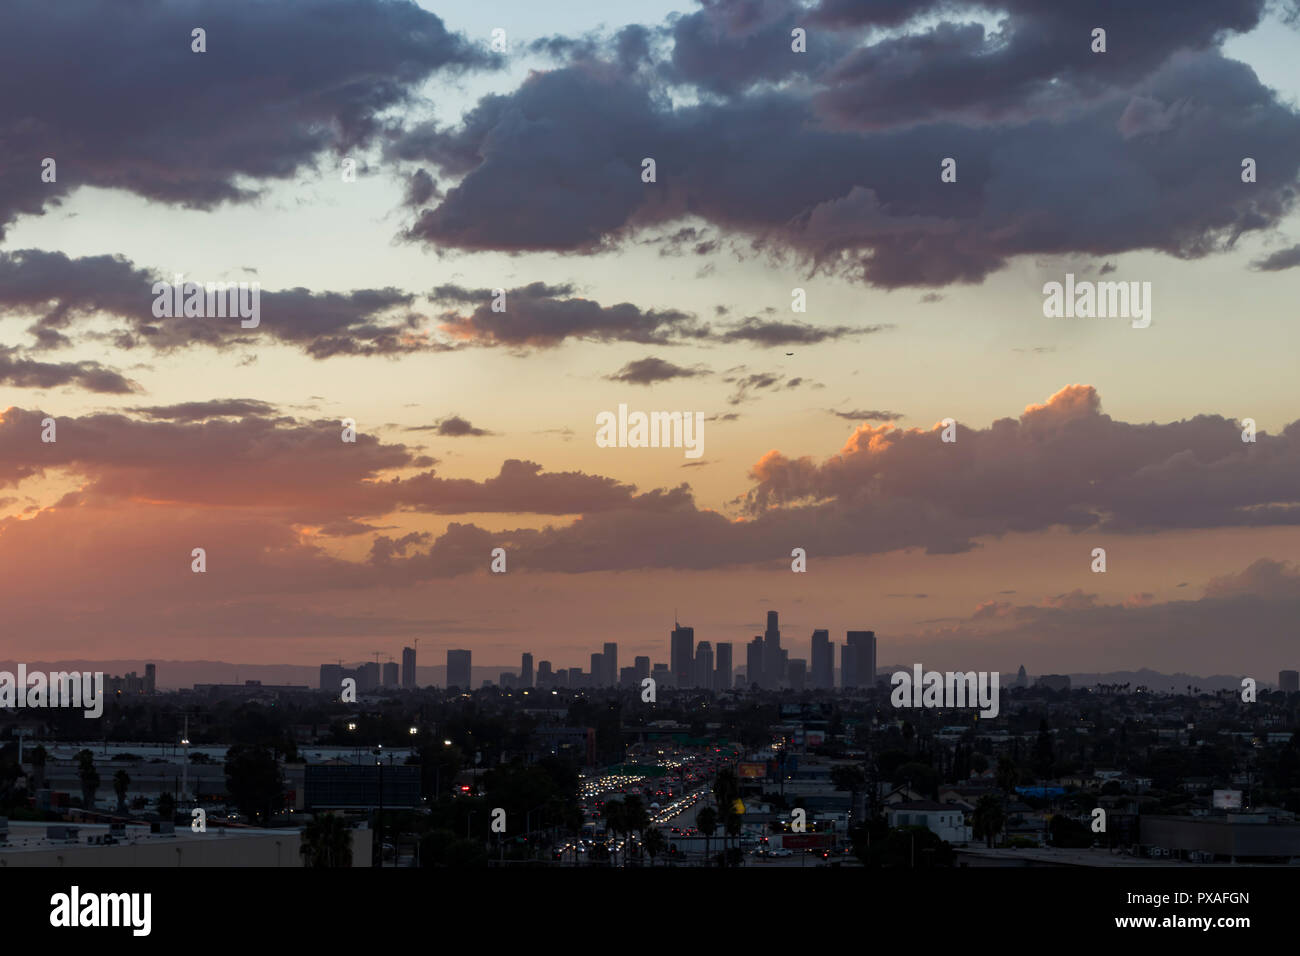 Silhouette of Downtown Los Angeles at sunset on a stormy autumn evening, California, USA. Stock Photo